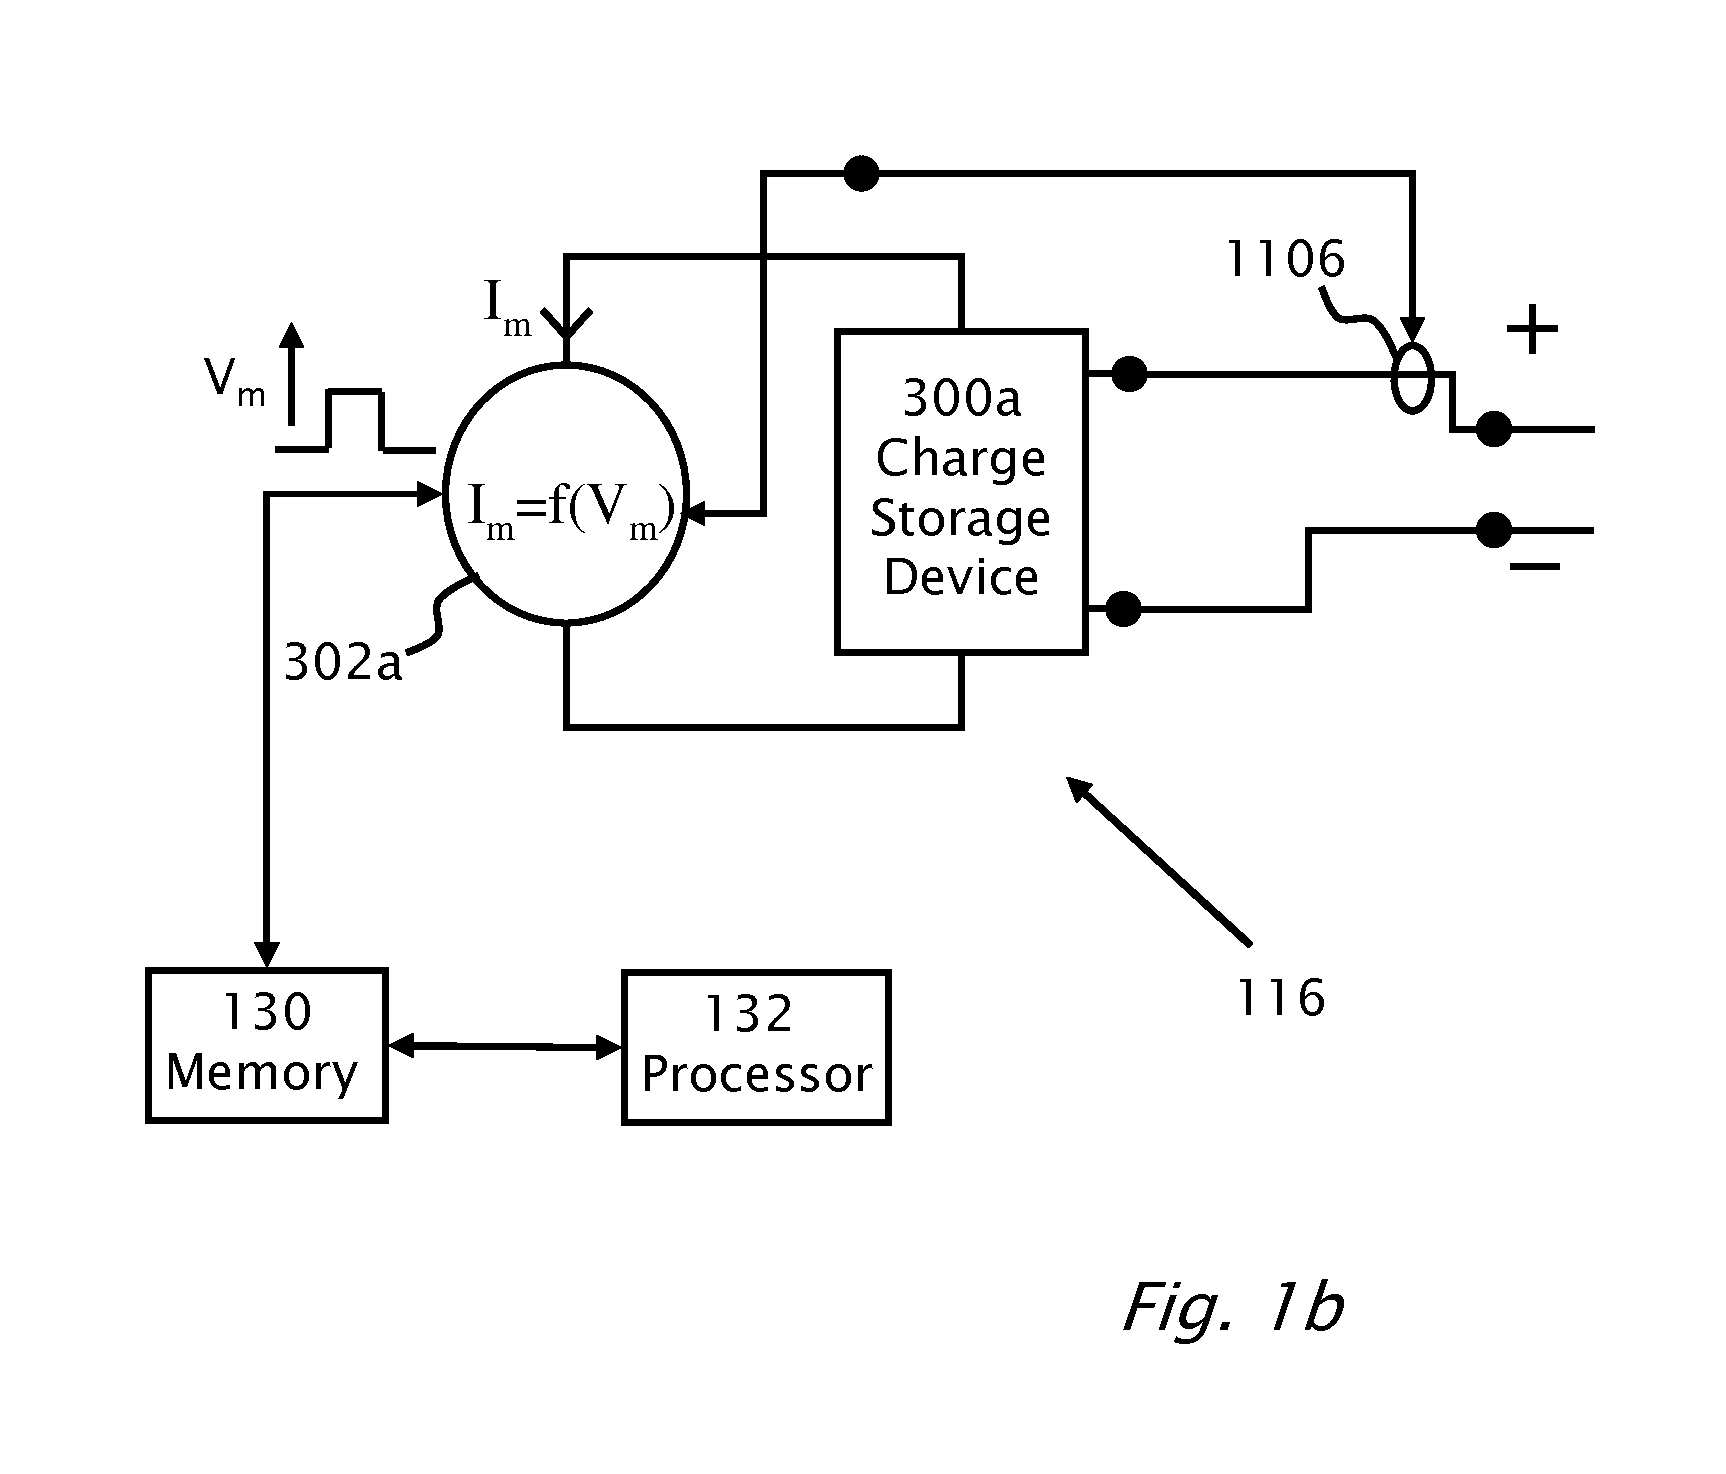 Pairing of components in a direct current distributed power generation system